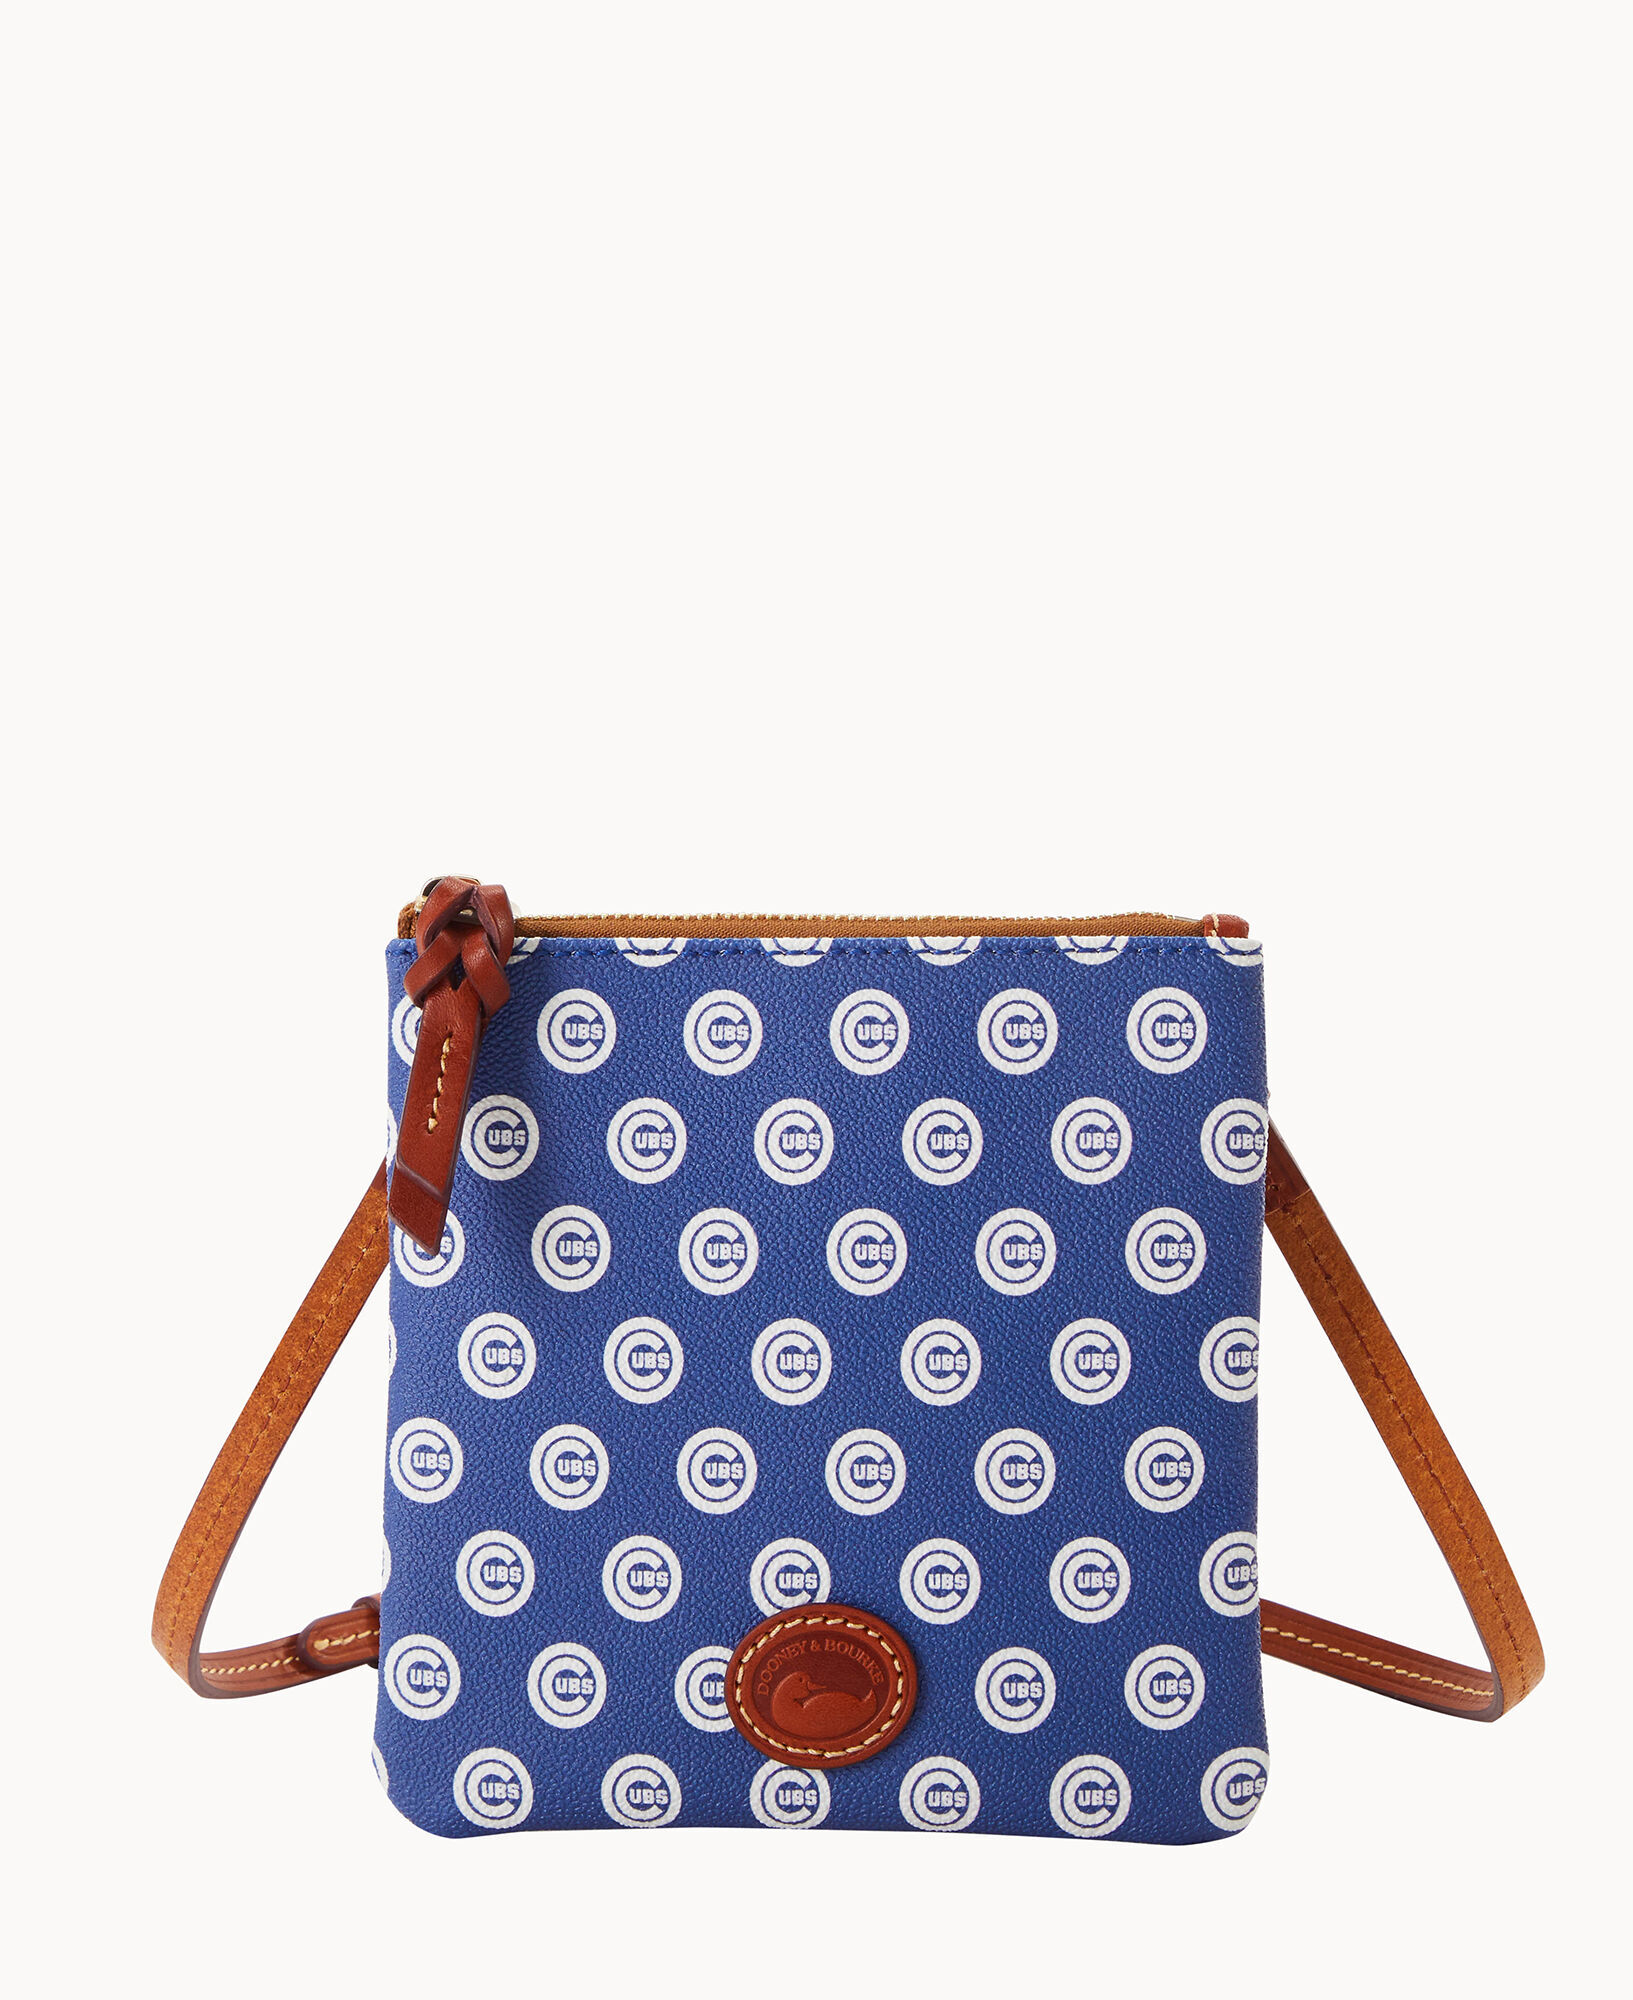 dooney and bourke cubs purse